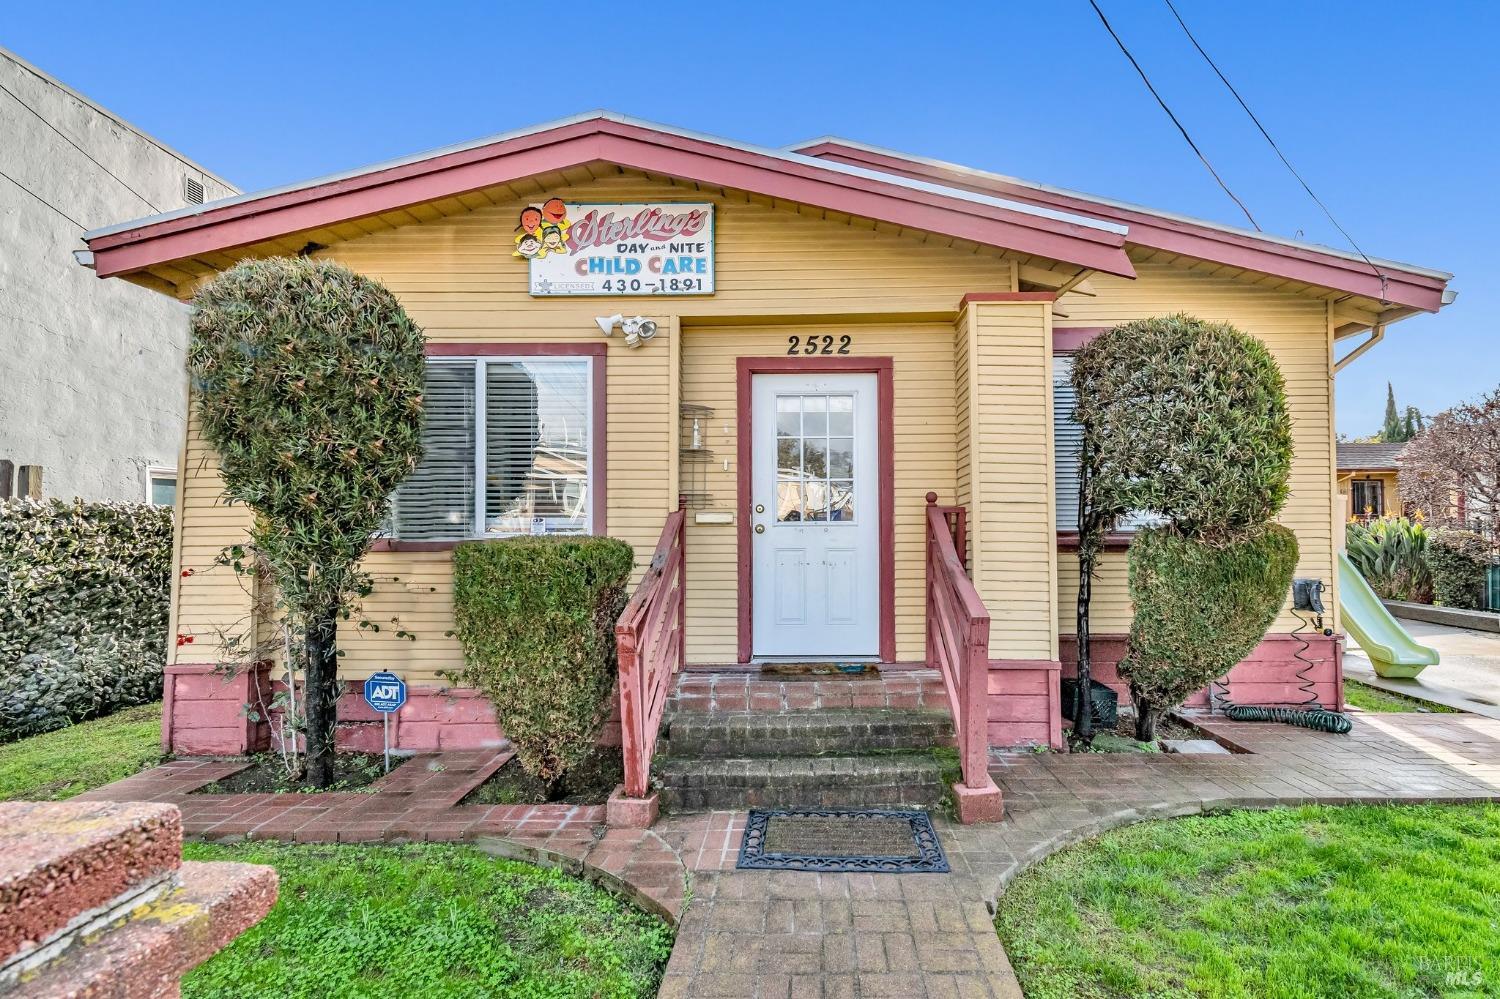 Photo of 2522 78th Ave in Oakland, CA